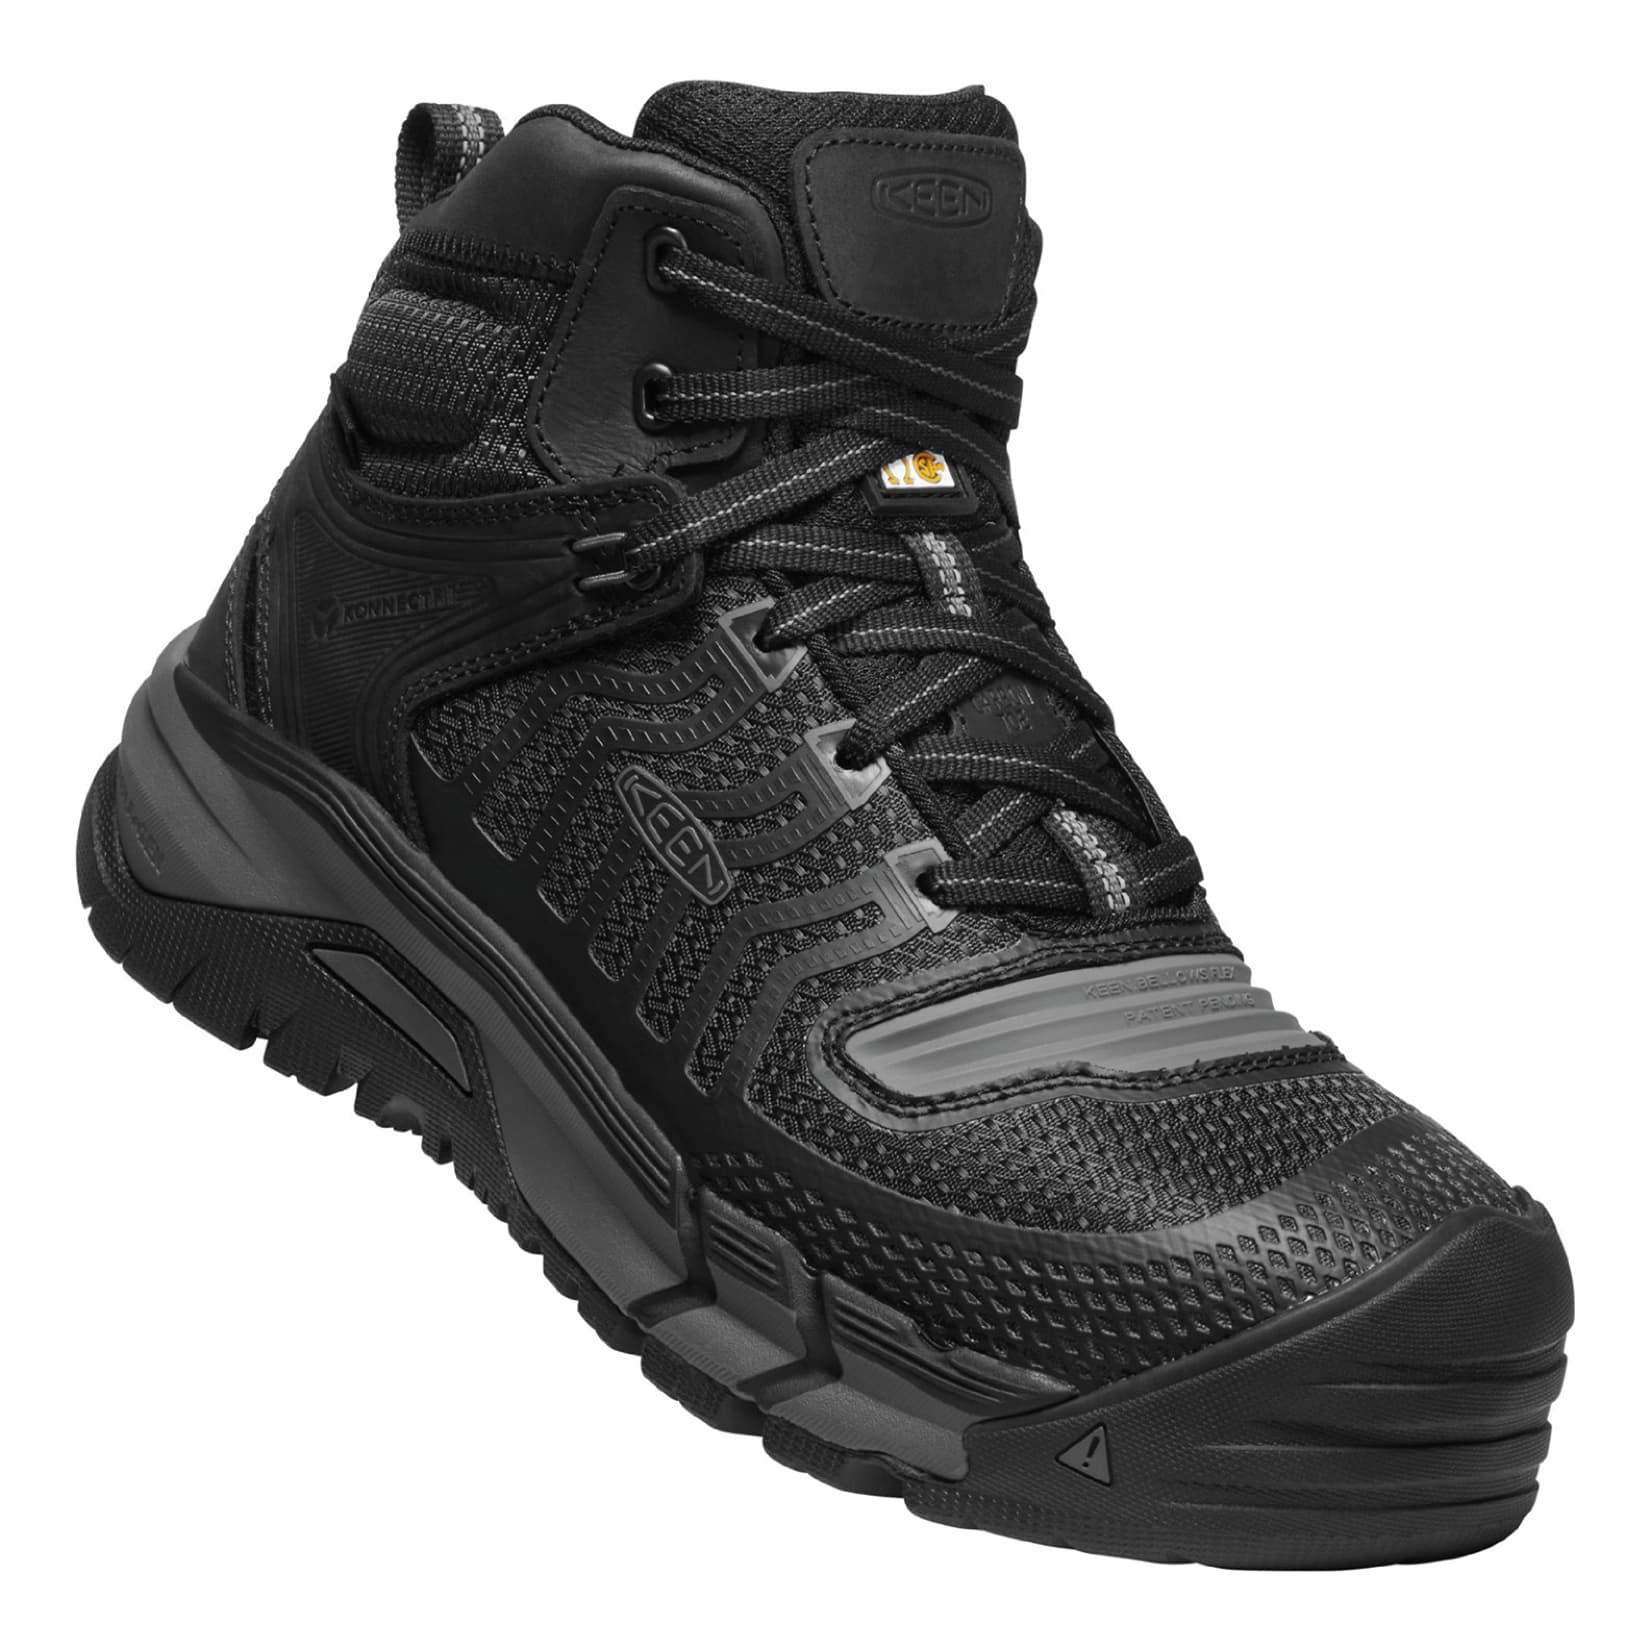 [1268951-001] Mens Under Armour Stellar Tactical Boots